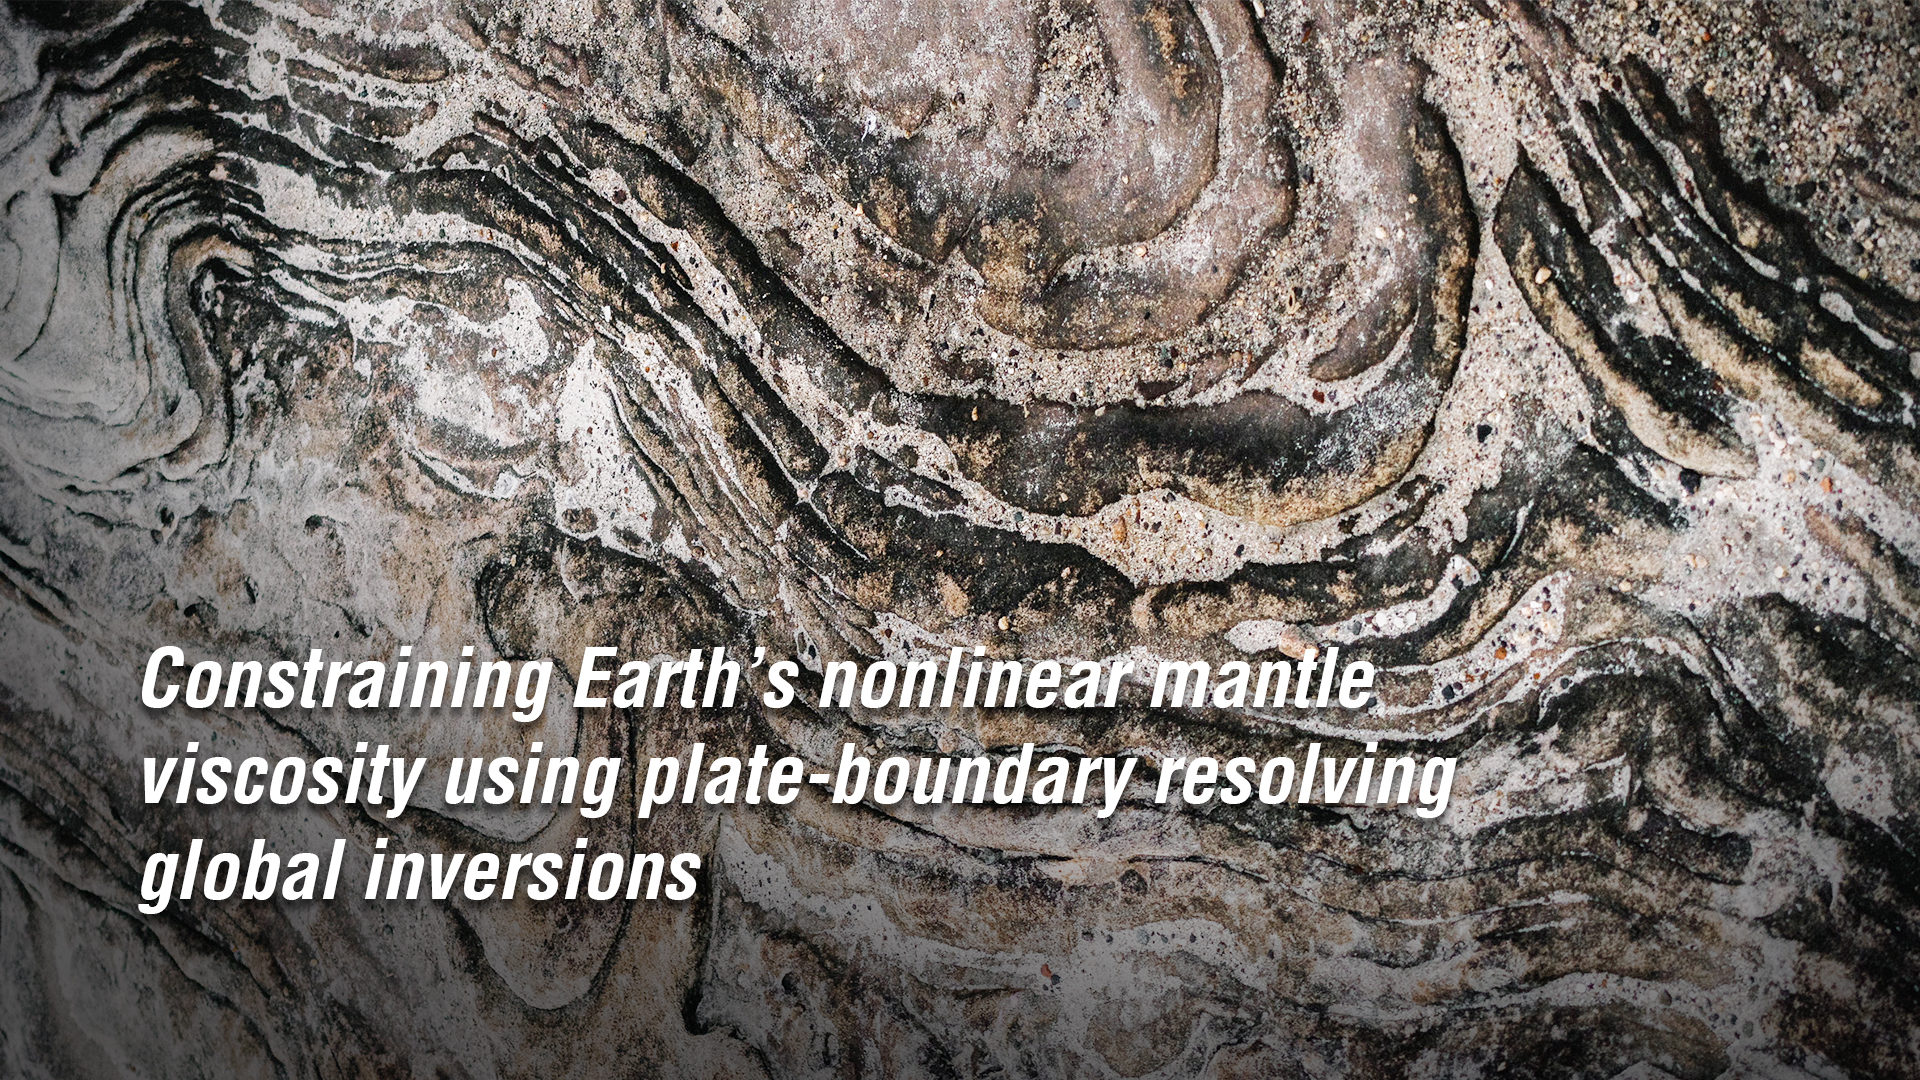 Researchers collaborate to constrain non-linear mantle rheology using global adjoint inversion